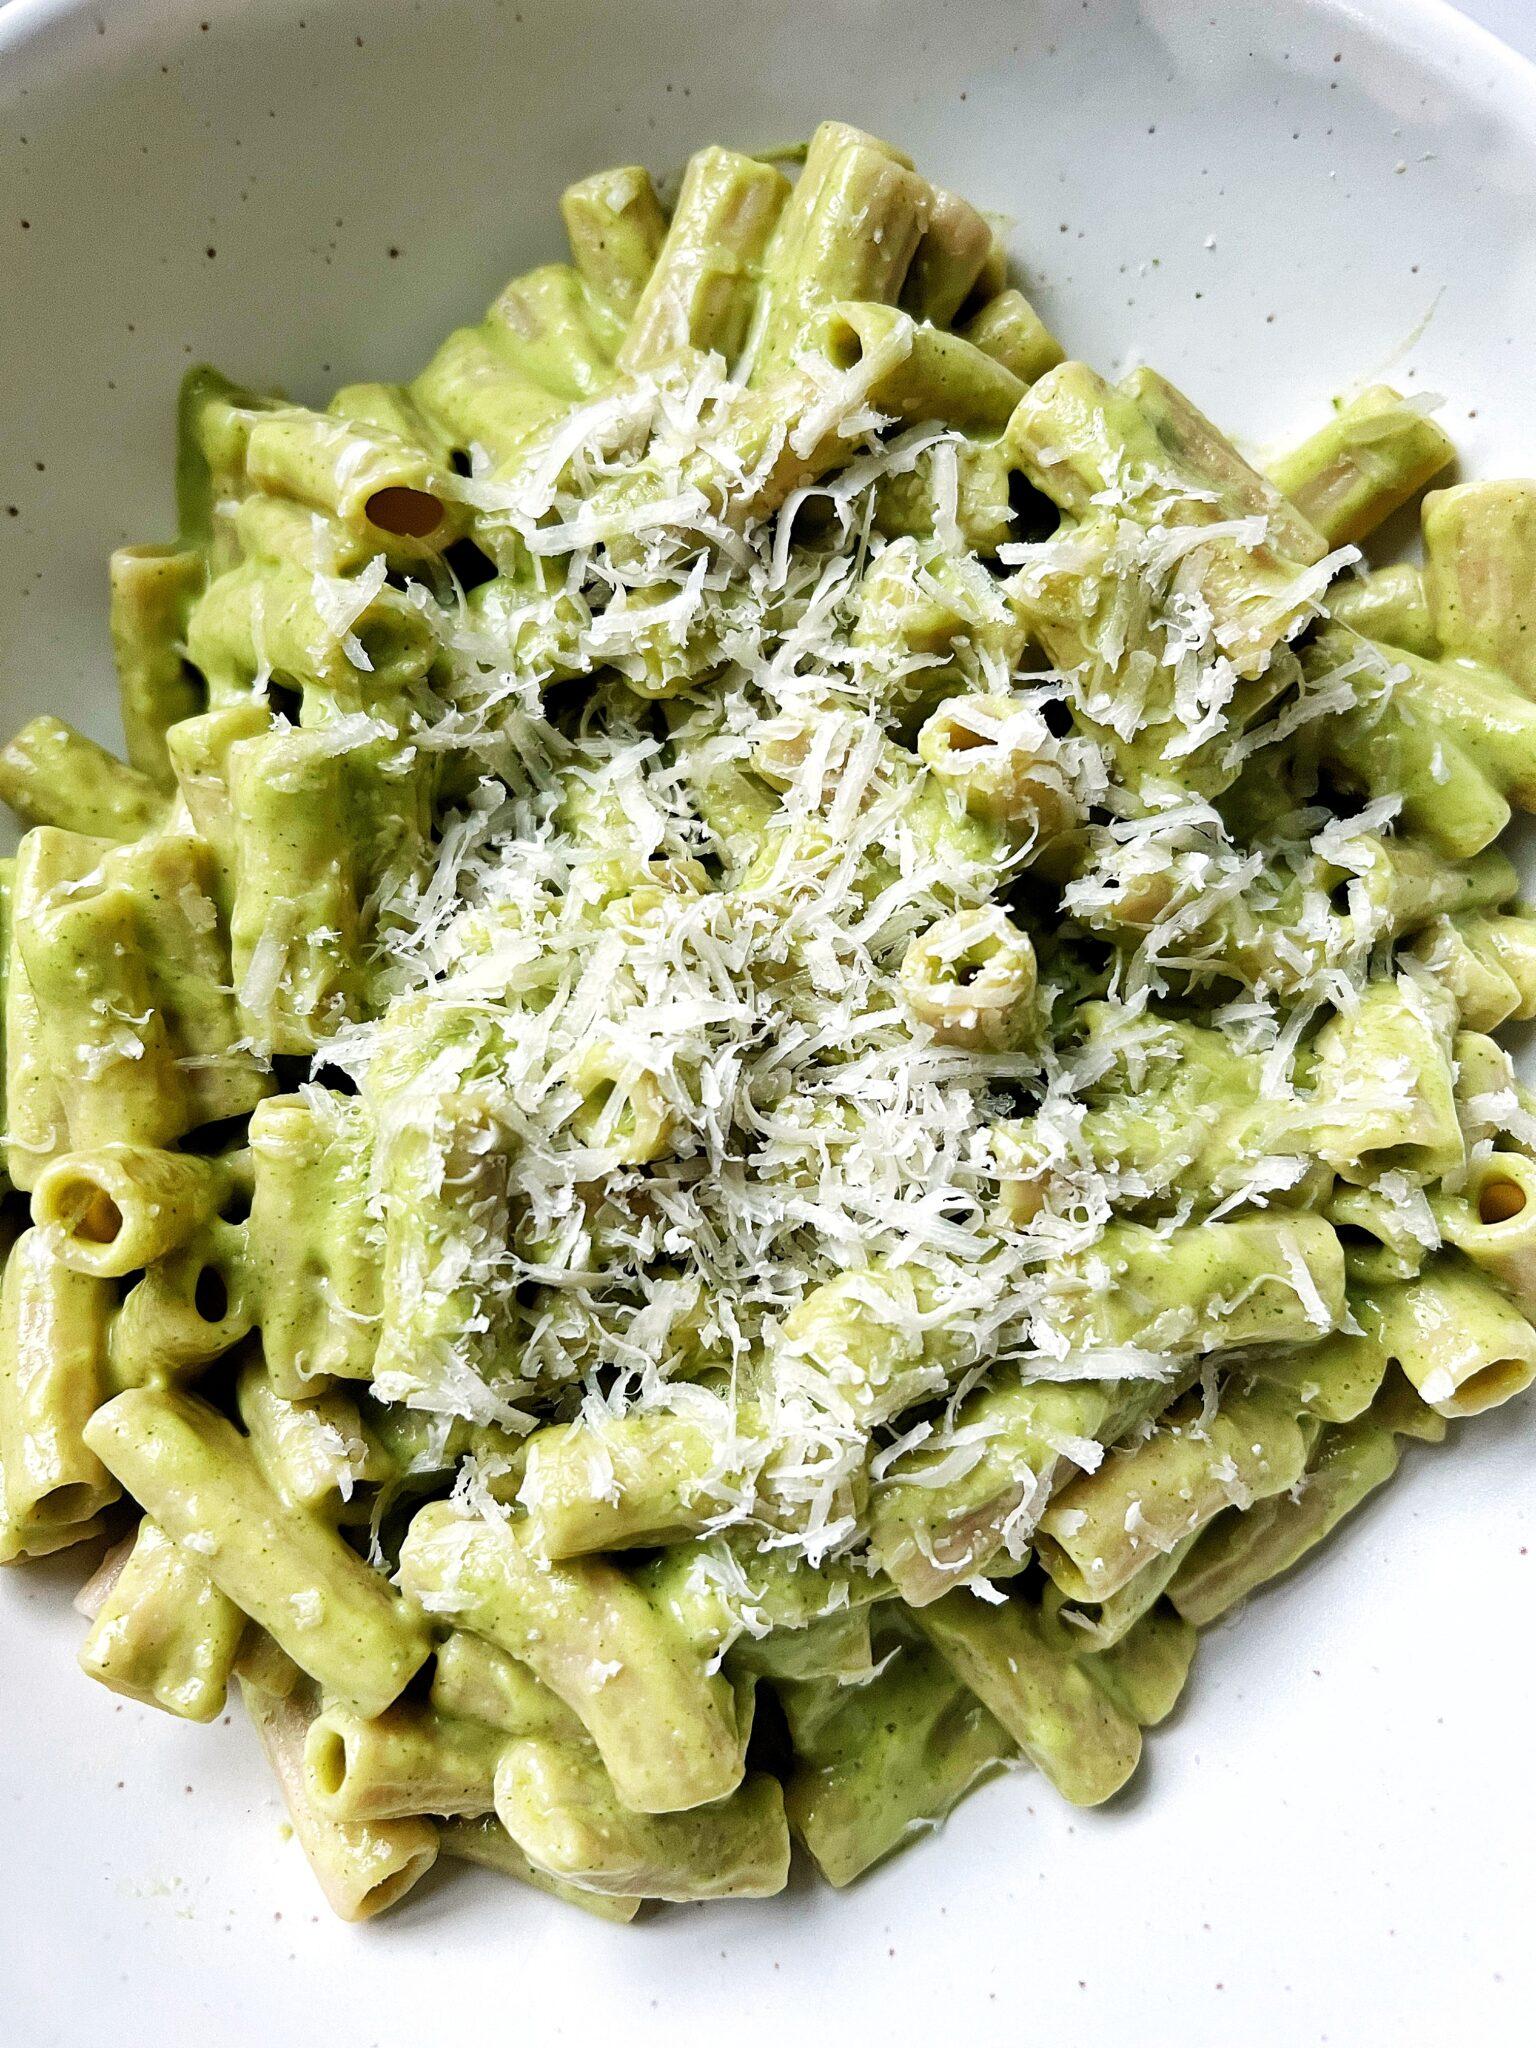 This gluten-free pasta tastes like creamy alfredo, but with a lighter twist, thanks to coconut milk. (via <a href="https://rachlmansfield.com/10-minute-creamy-zucchini-pasta-gluten-free/"><strong>Rachel Mansfield</strong></a>)